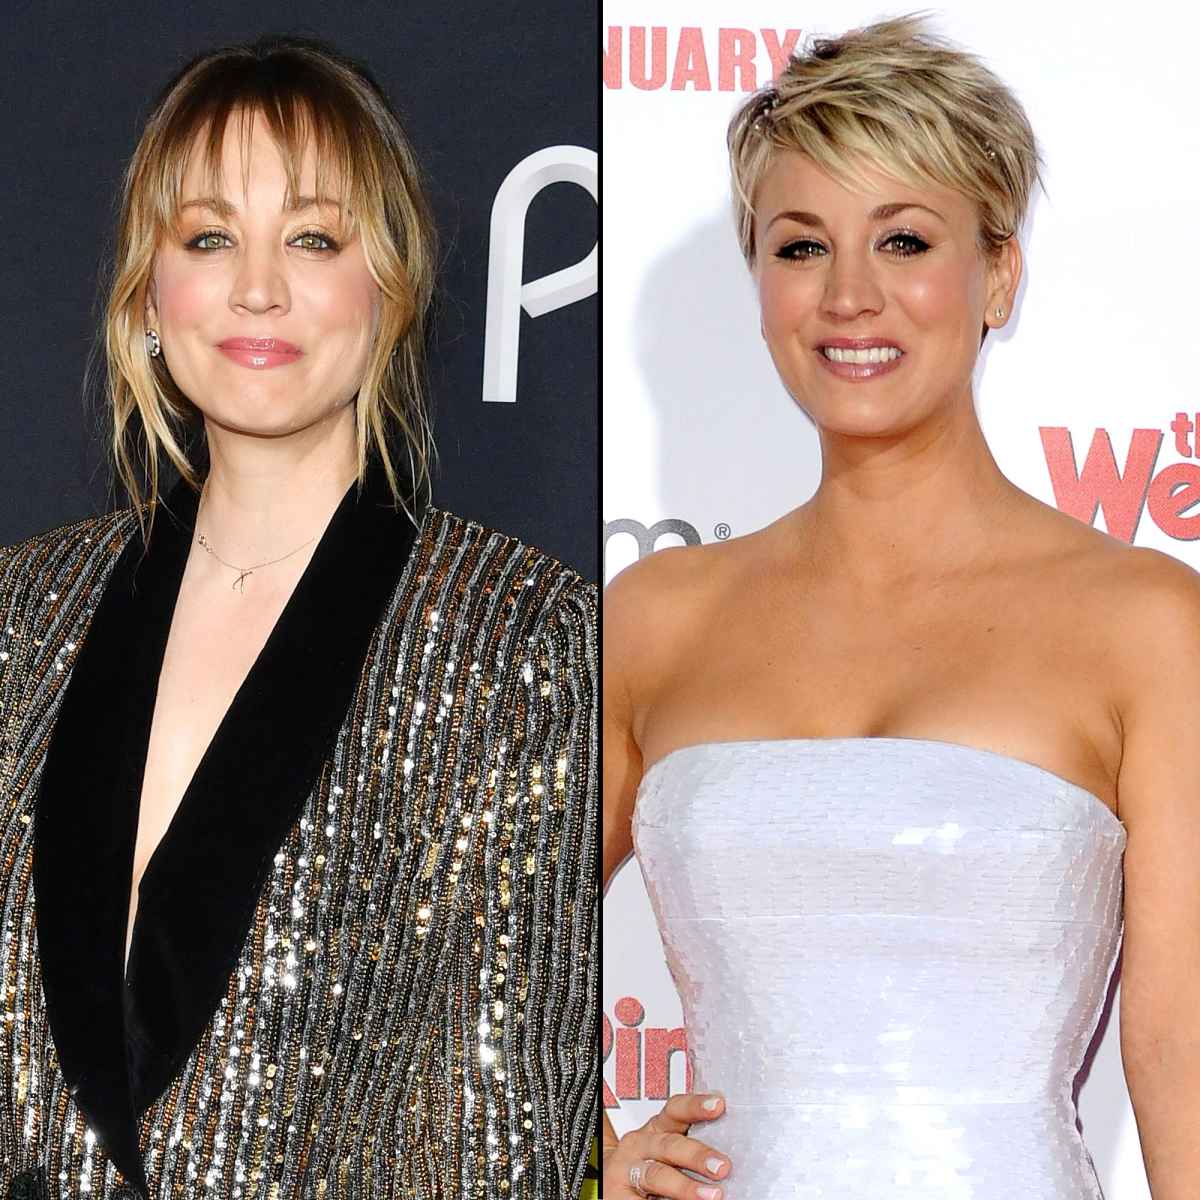 Kaley Cuoco on 'Big Bang Theory' Pixie Cut: 'Worst Decision'